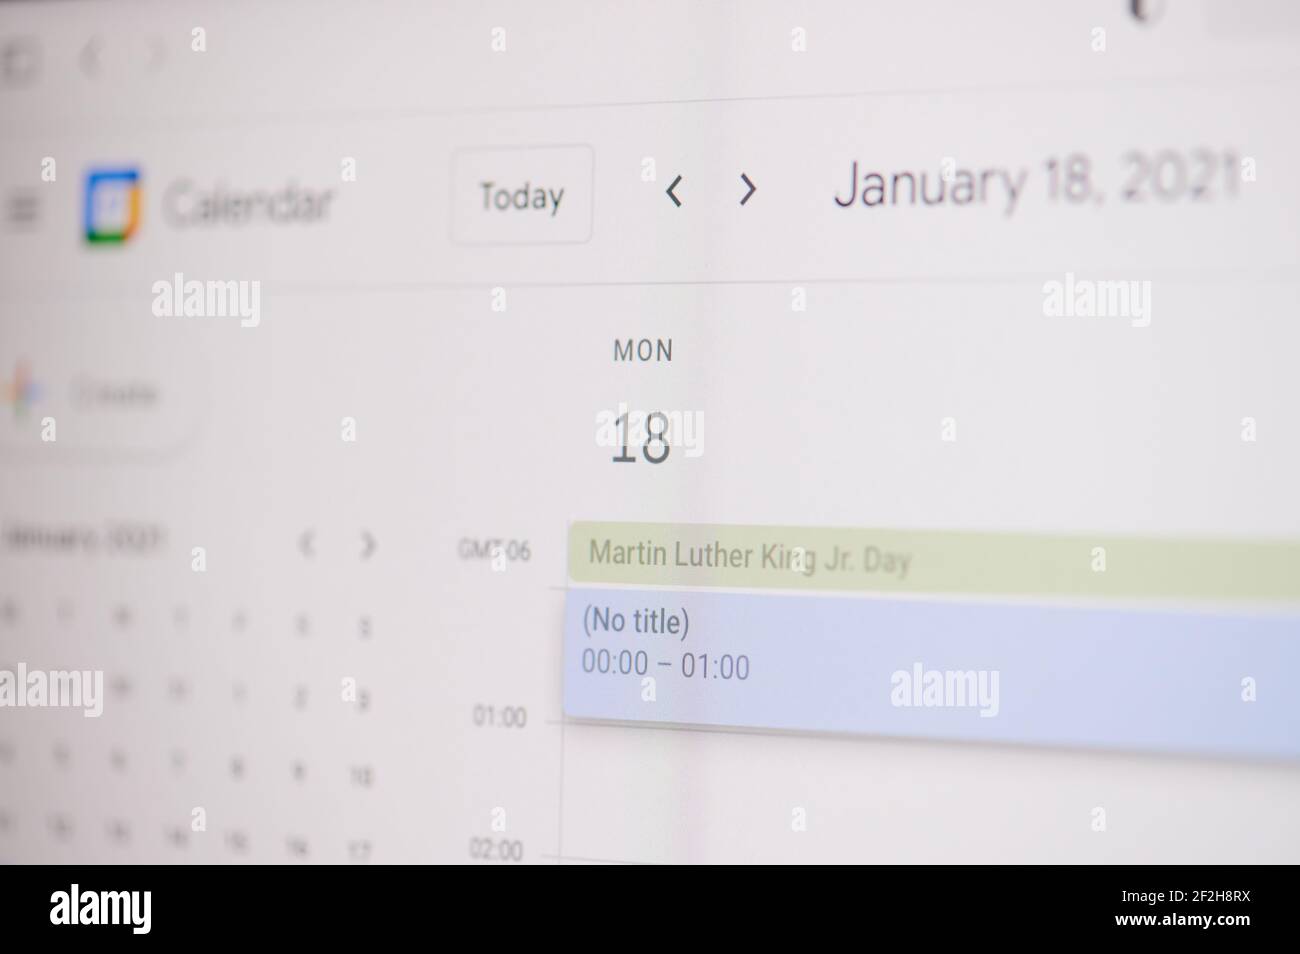 New york, USA - February 17, 2021: Martin Luther King day 18 of January on google calendar on laptop screen close up view. Stock Photo